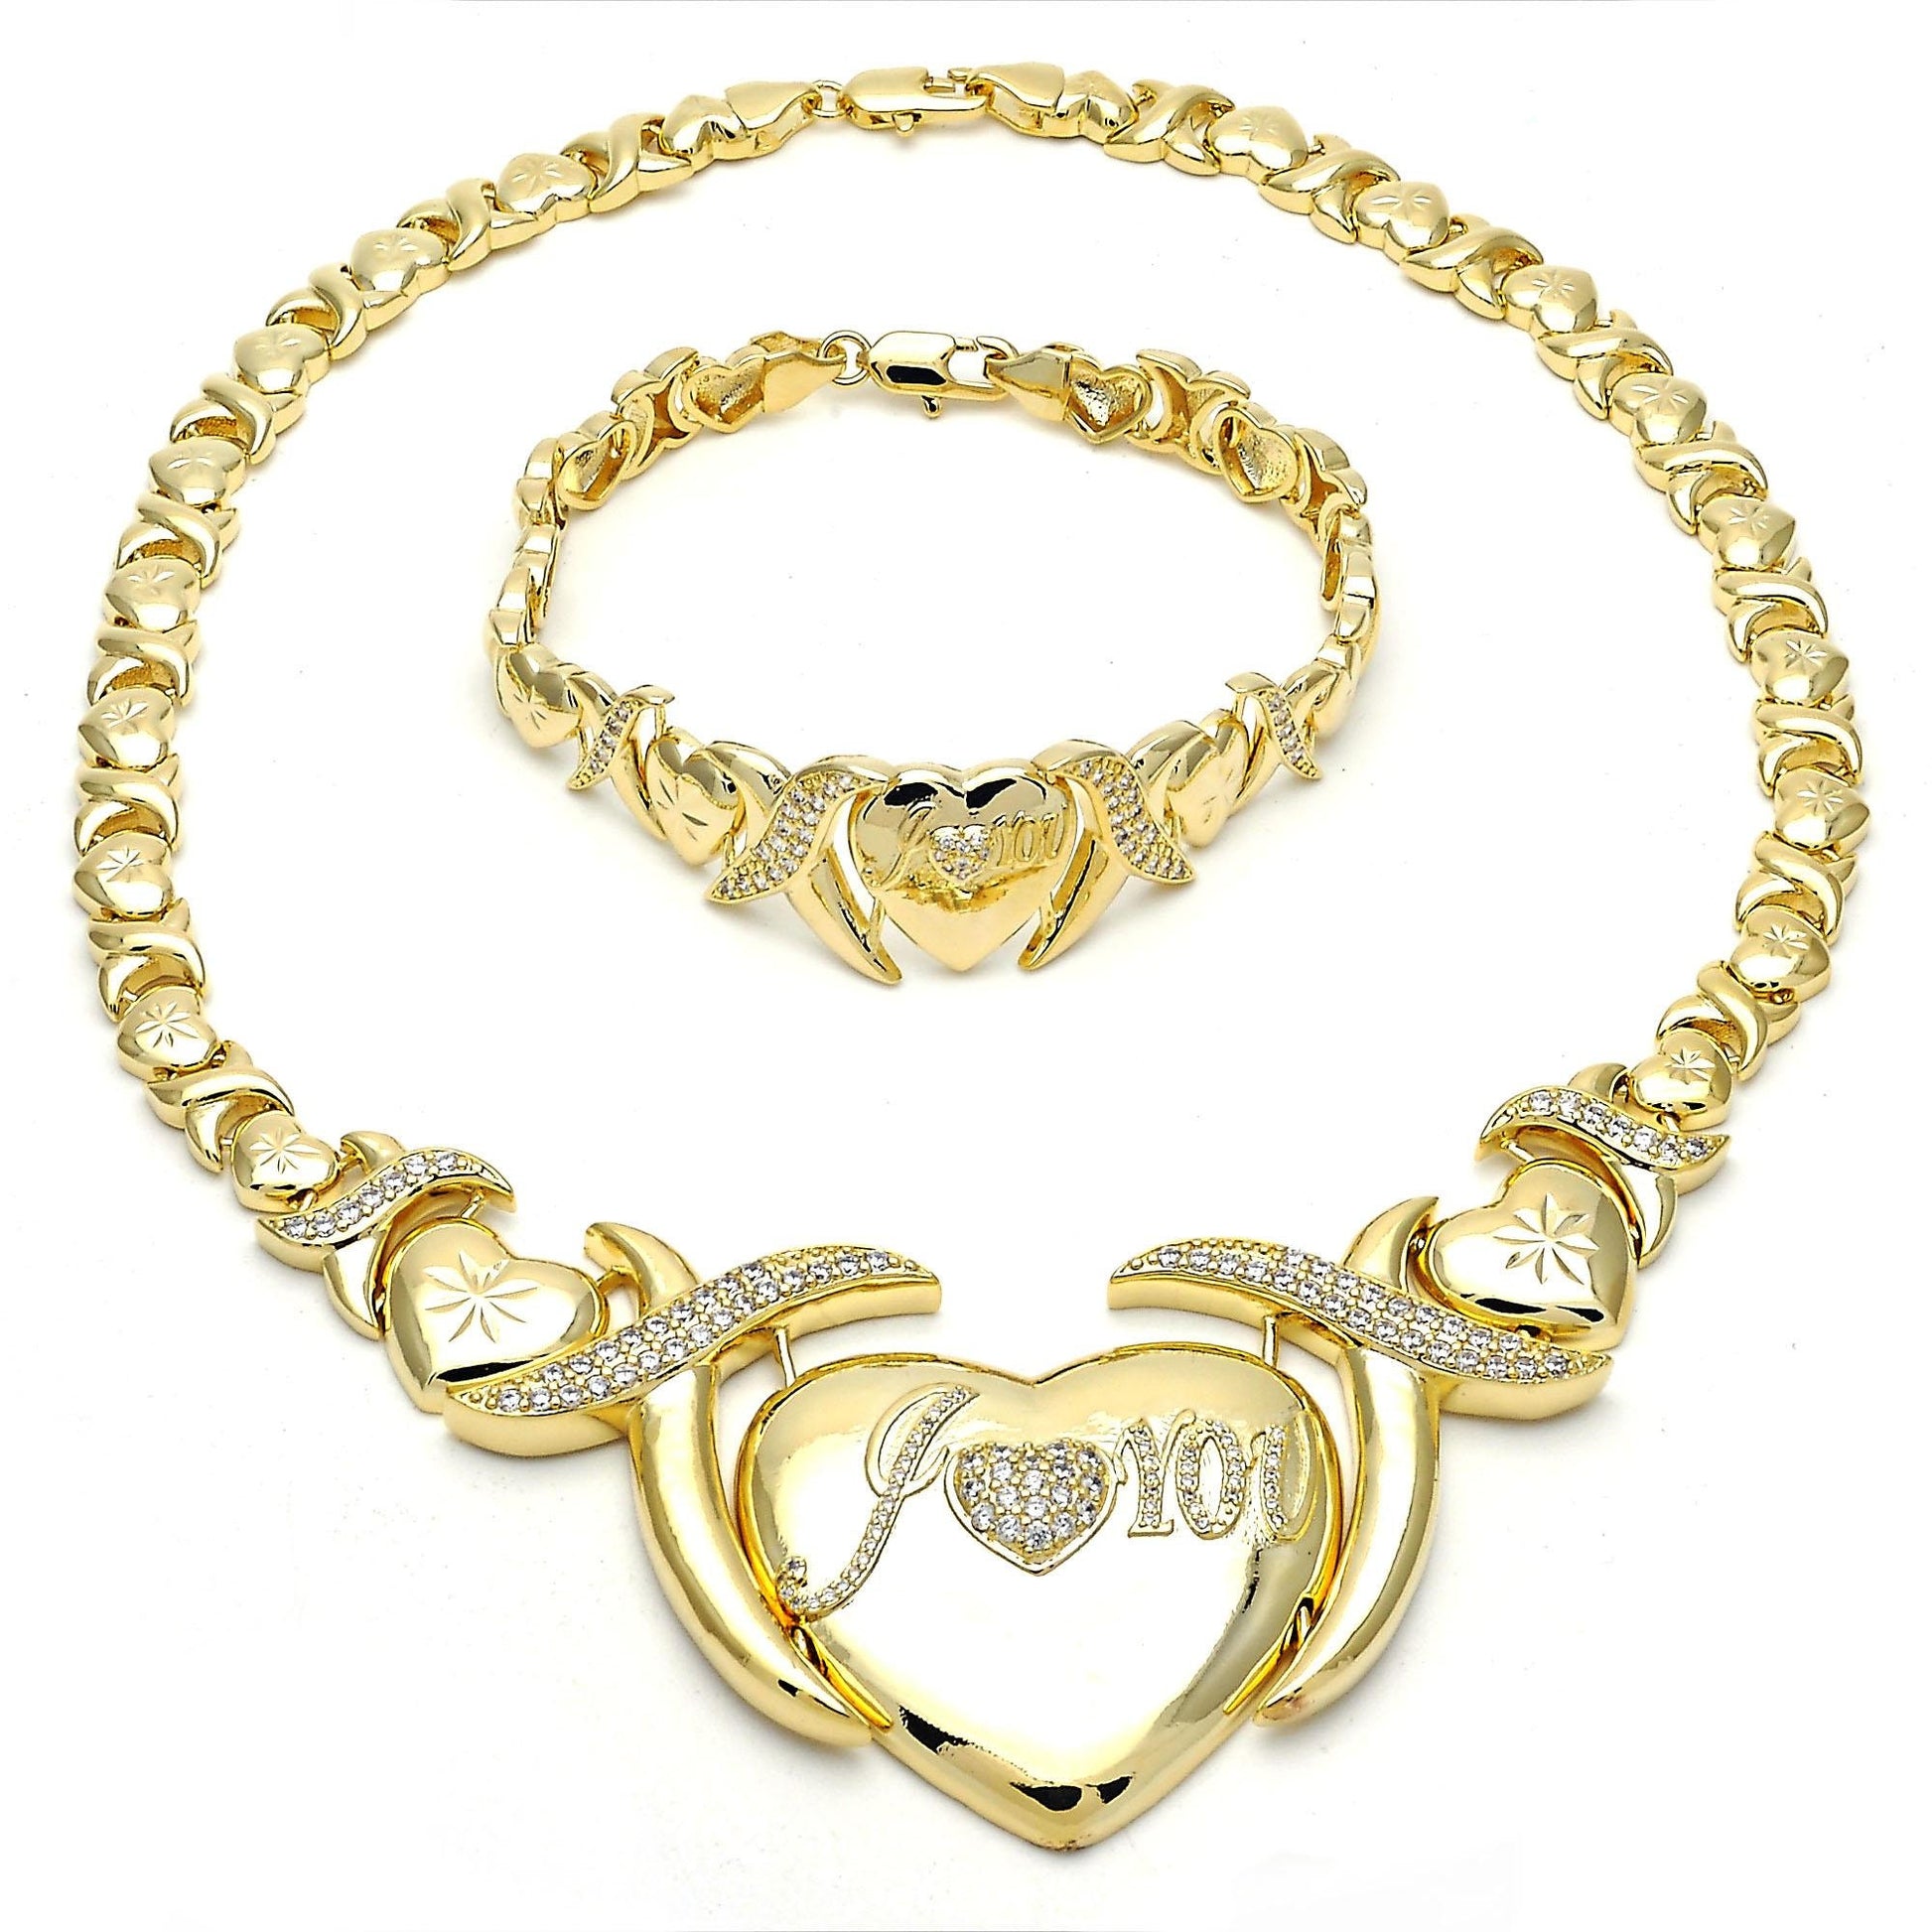 Women's Hugs & Kisses XOXO Butterfly Charm Necklace Set 18k Layered Real  Gold Plated Includes Necklace Bracelet Earrings Ring Set